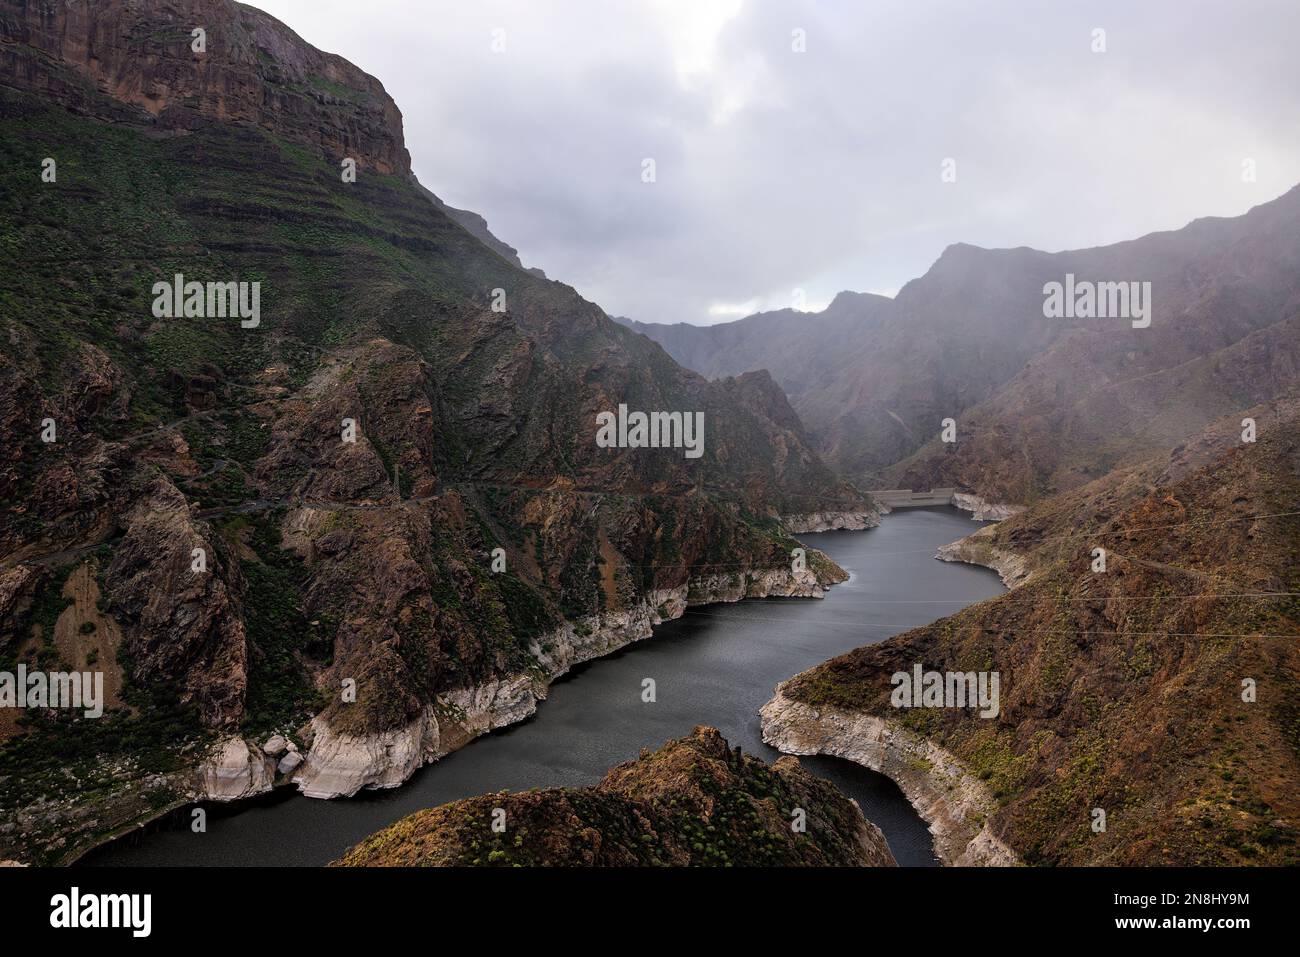 The river between two mountains on cloudy day with low clouds. Landscape photo with no people. Stock Photo